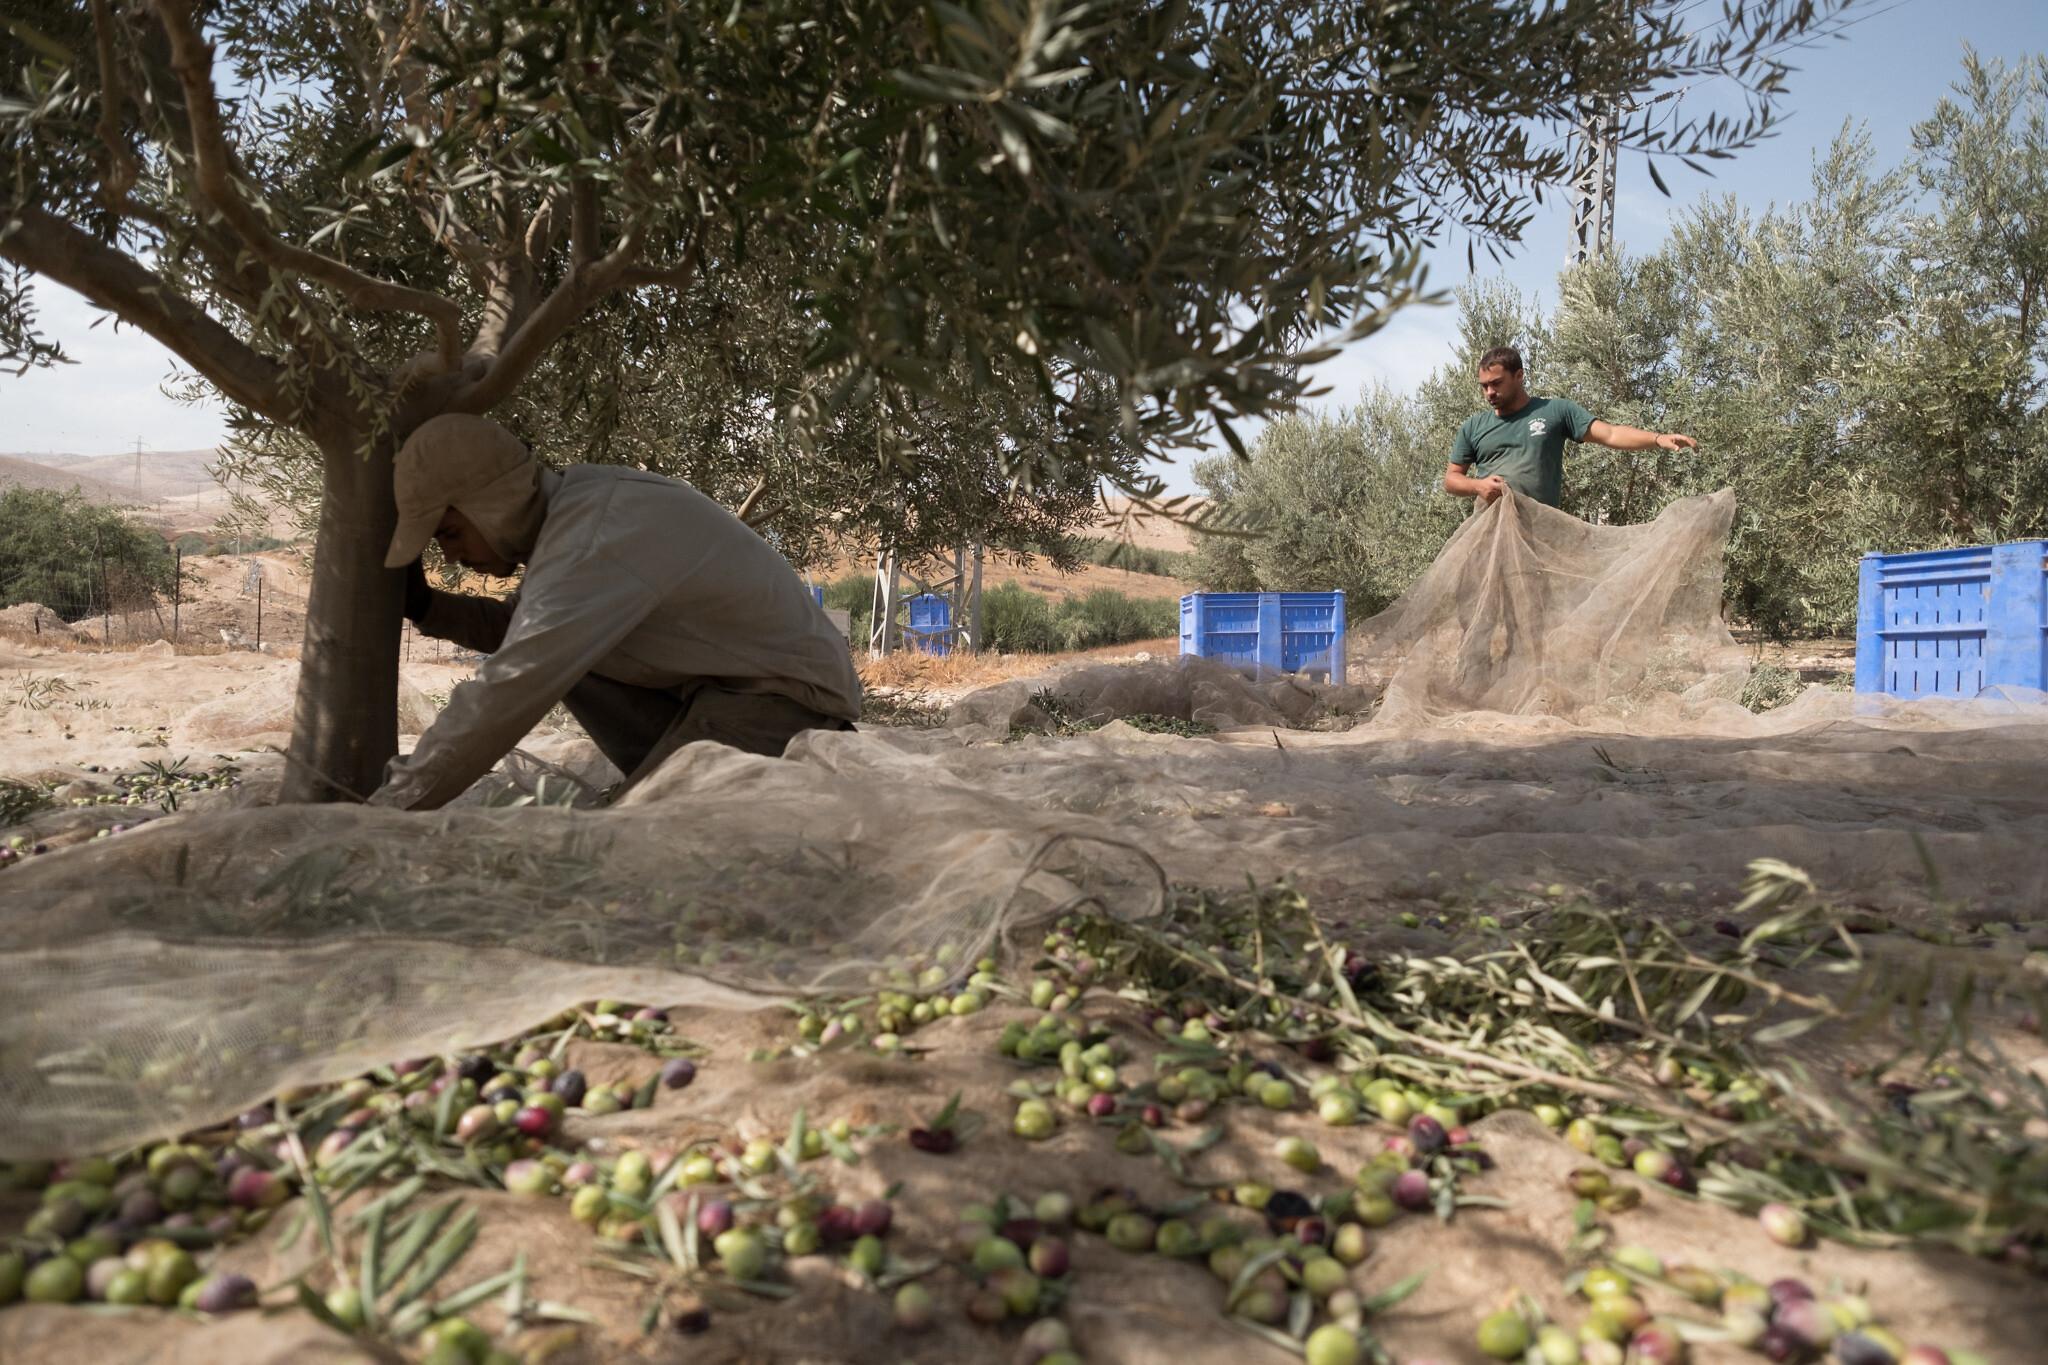 Digging into the past of olive trees.